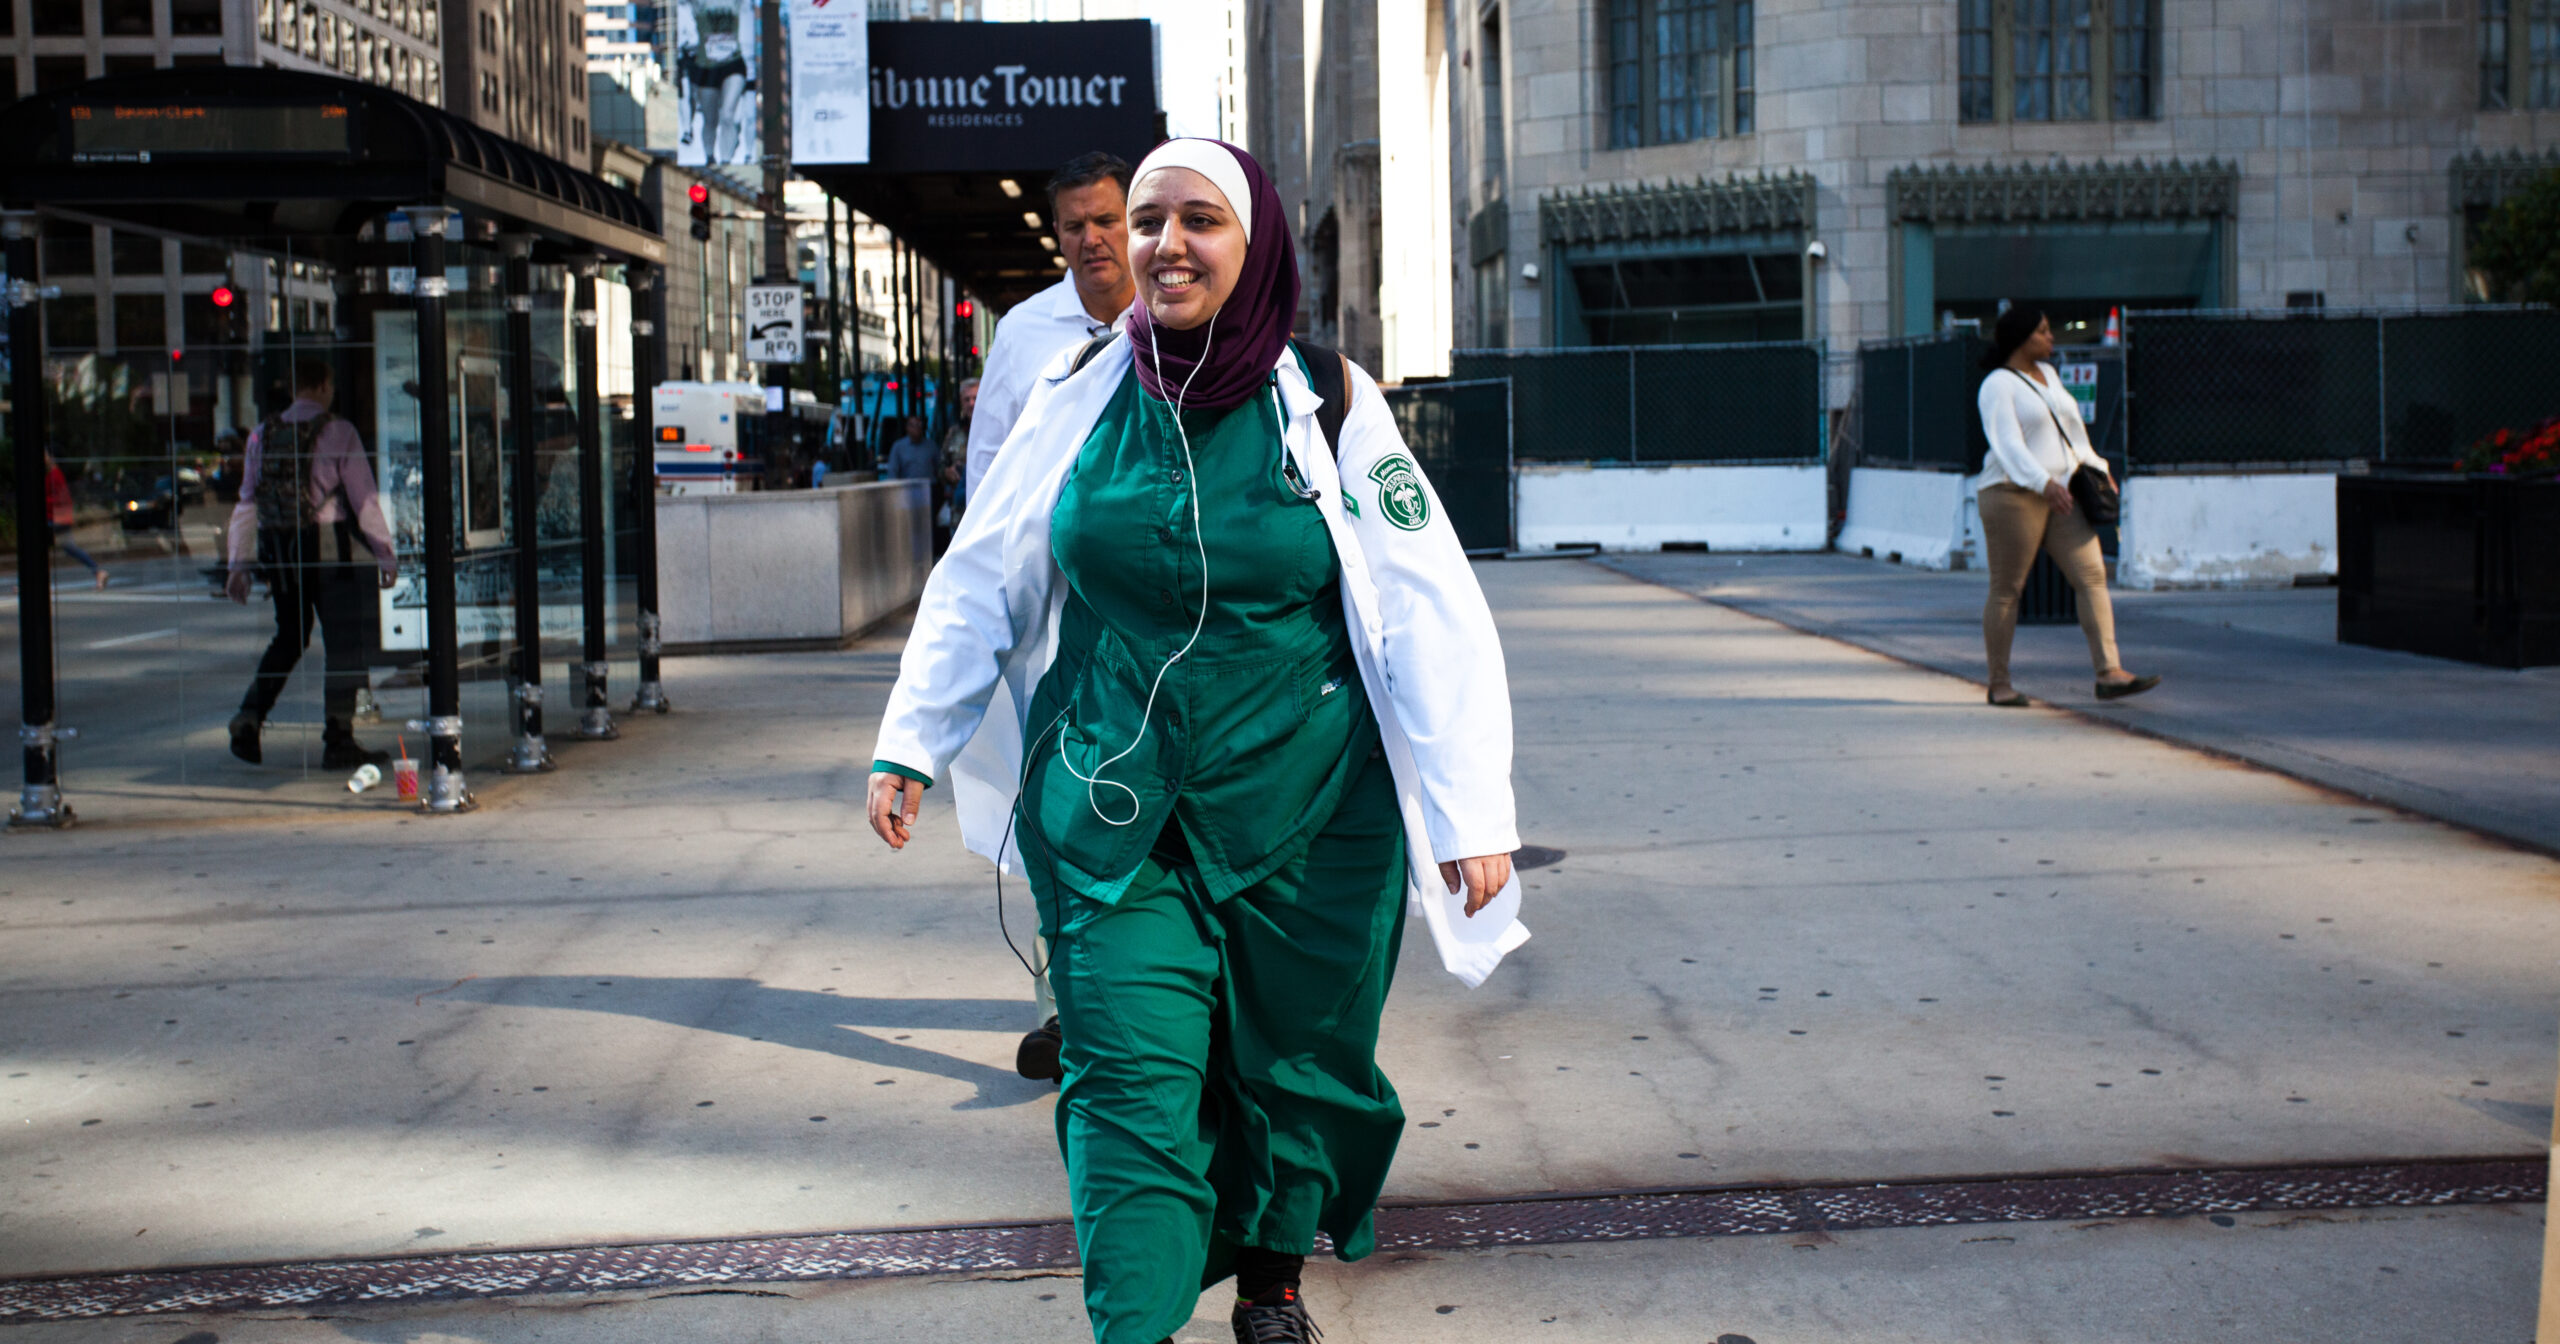 A woman wearing a hijab and medical scrubs crosses the street